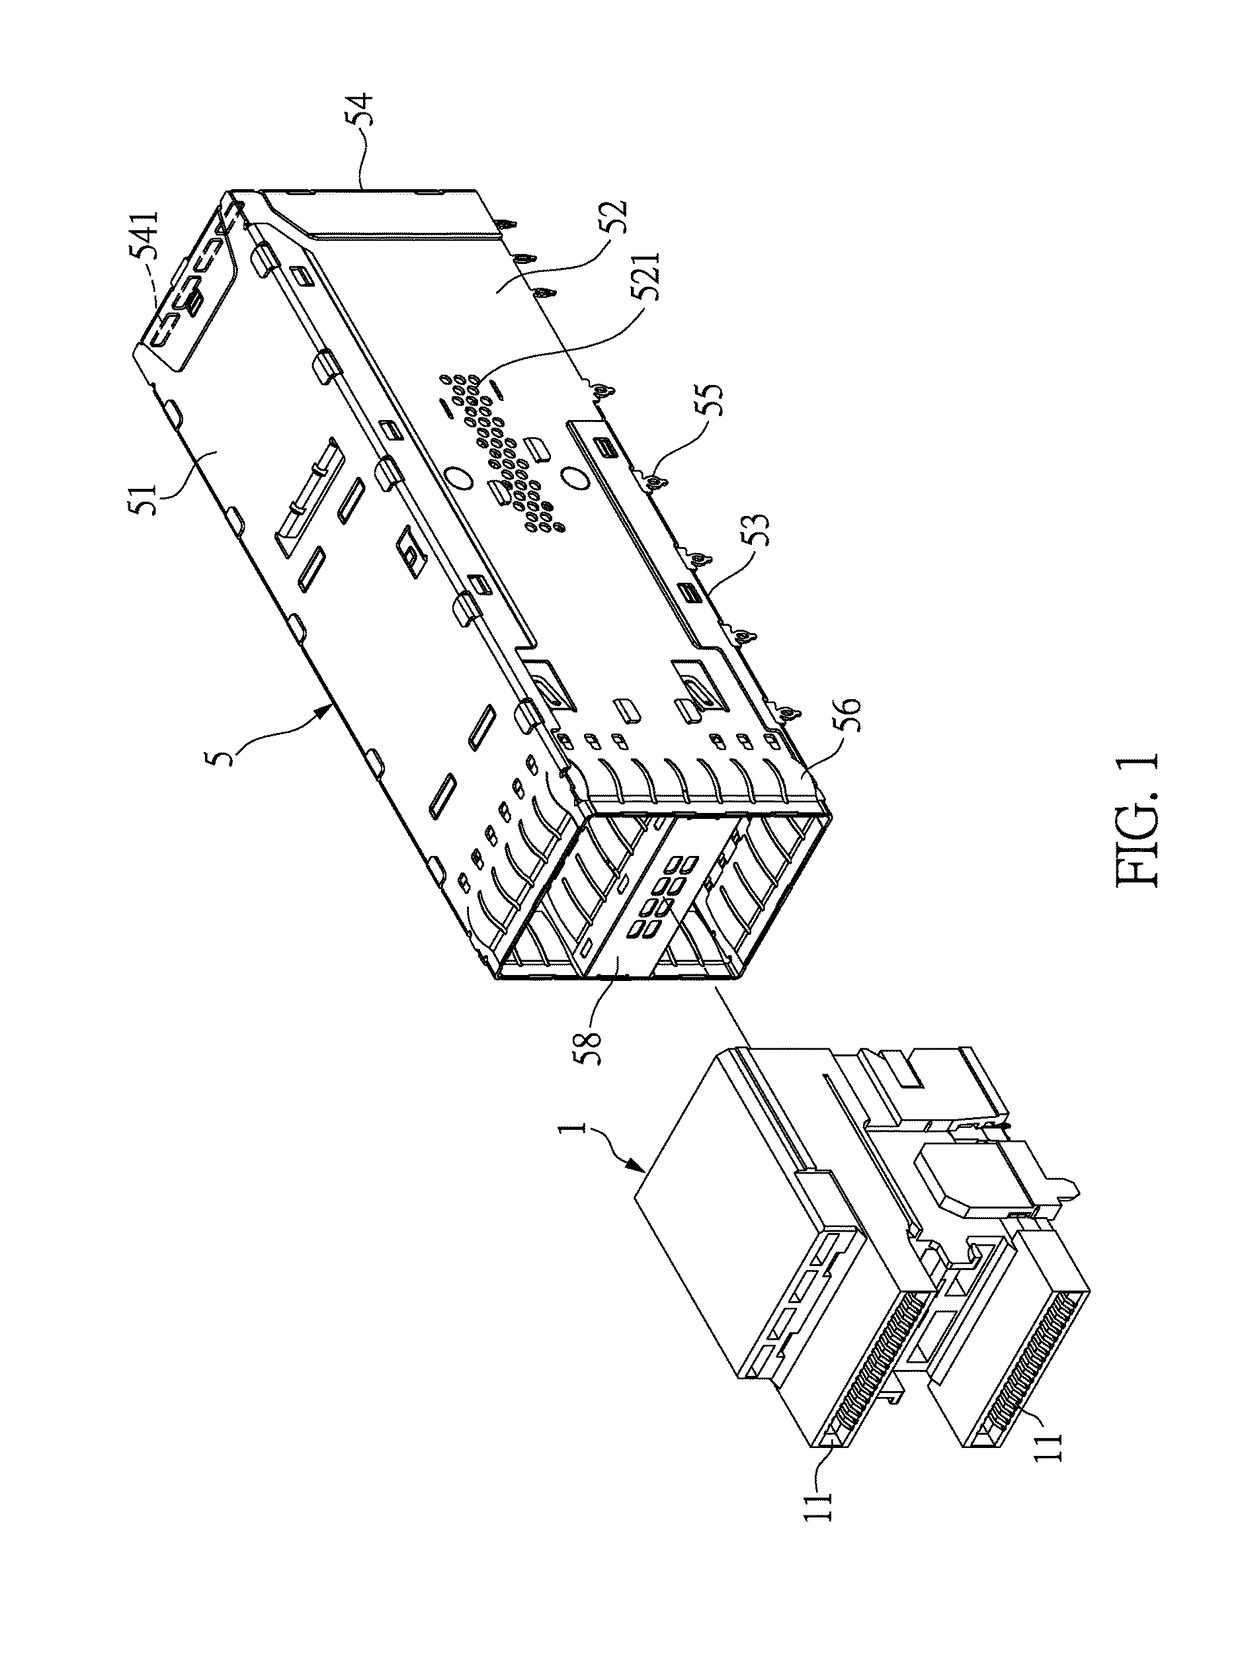 High frequency signal communication connector with improved crosstalk performance